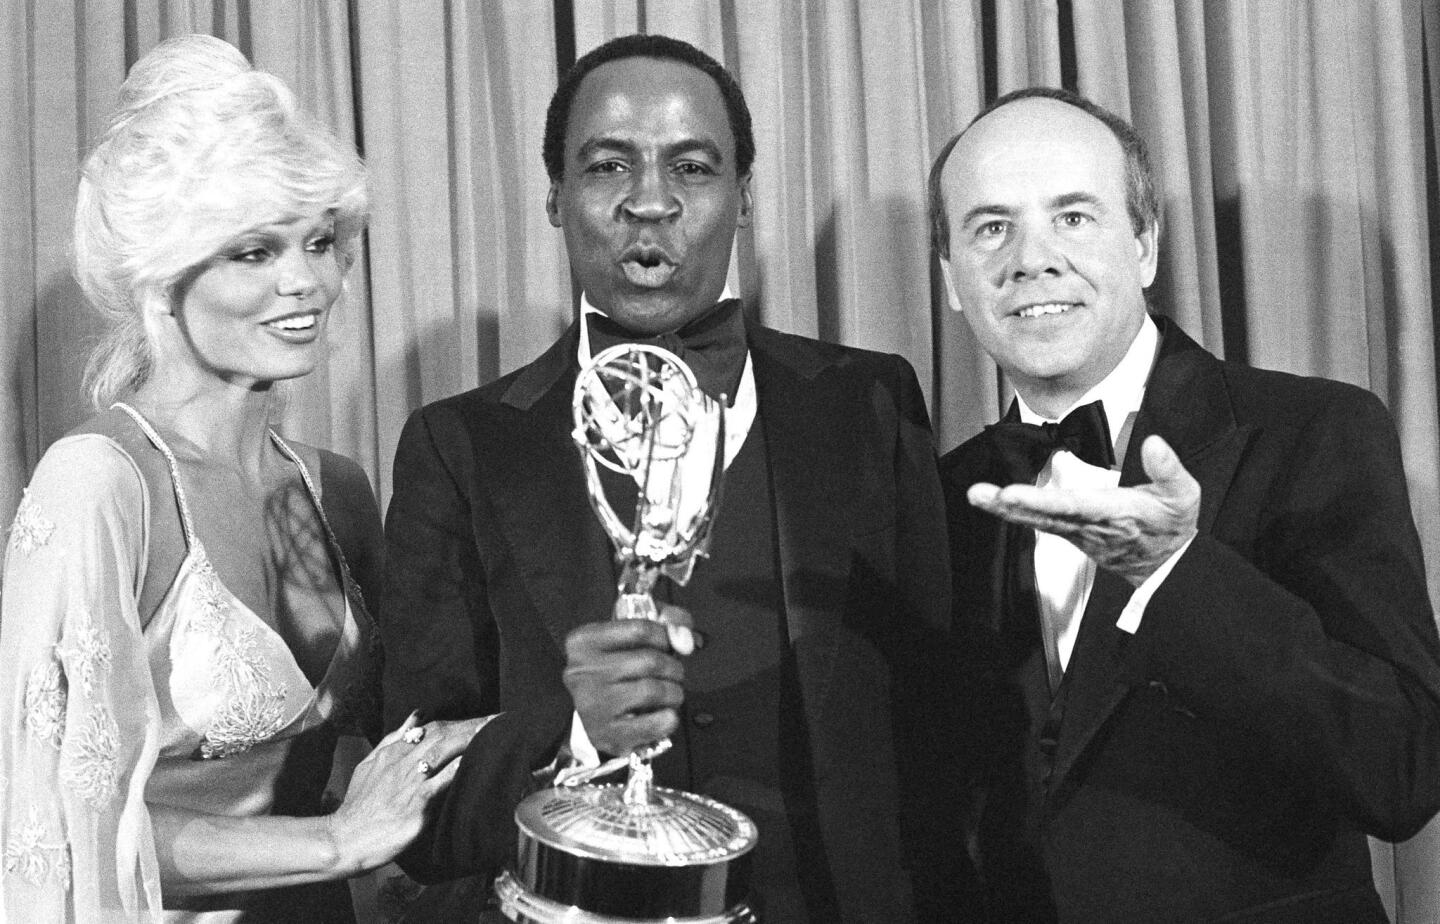 Guillaume, center, accepts his Emmy Award for supporting actor in a comedy-variety or music series for his role in "Soap" from Tim Conway, right, and Loni Anderson at the 31st Emmy Awards in Los Angeles on Sept. 10, 1979.